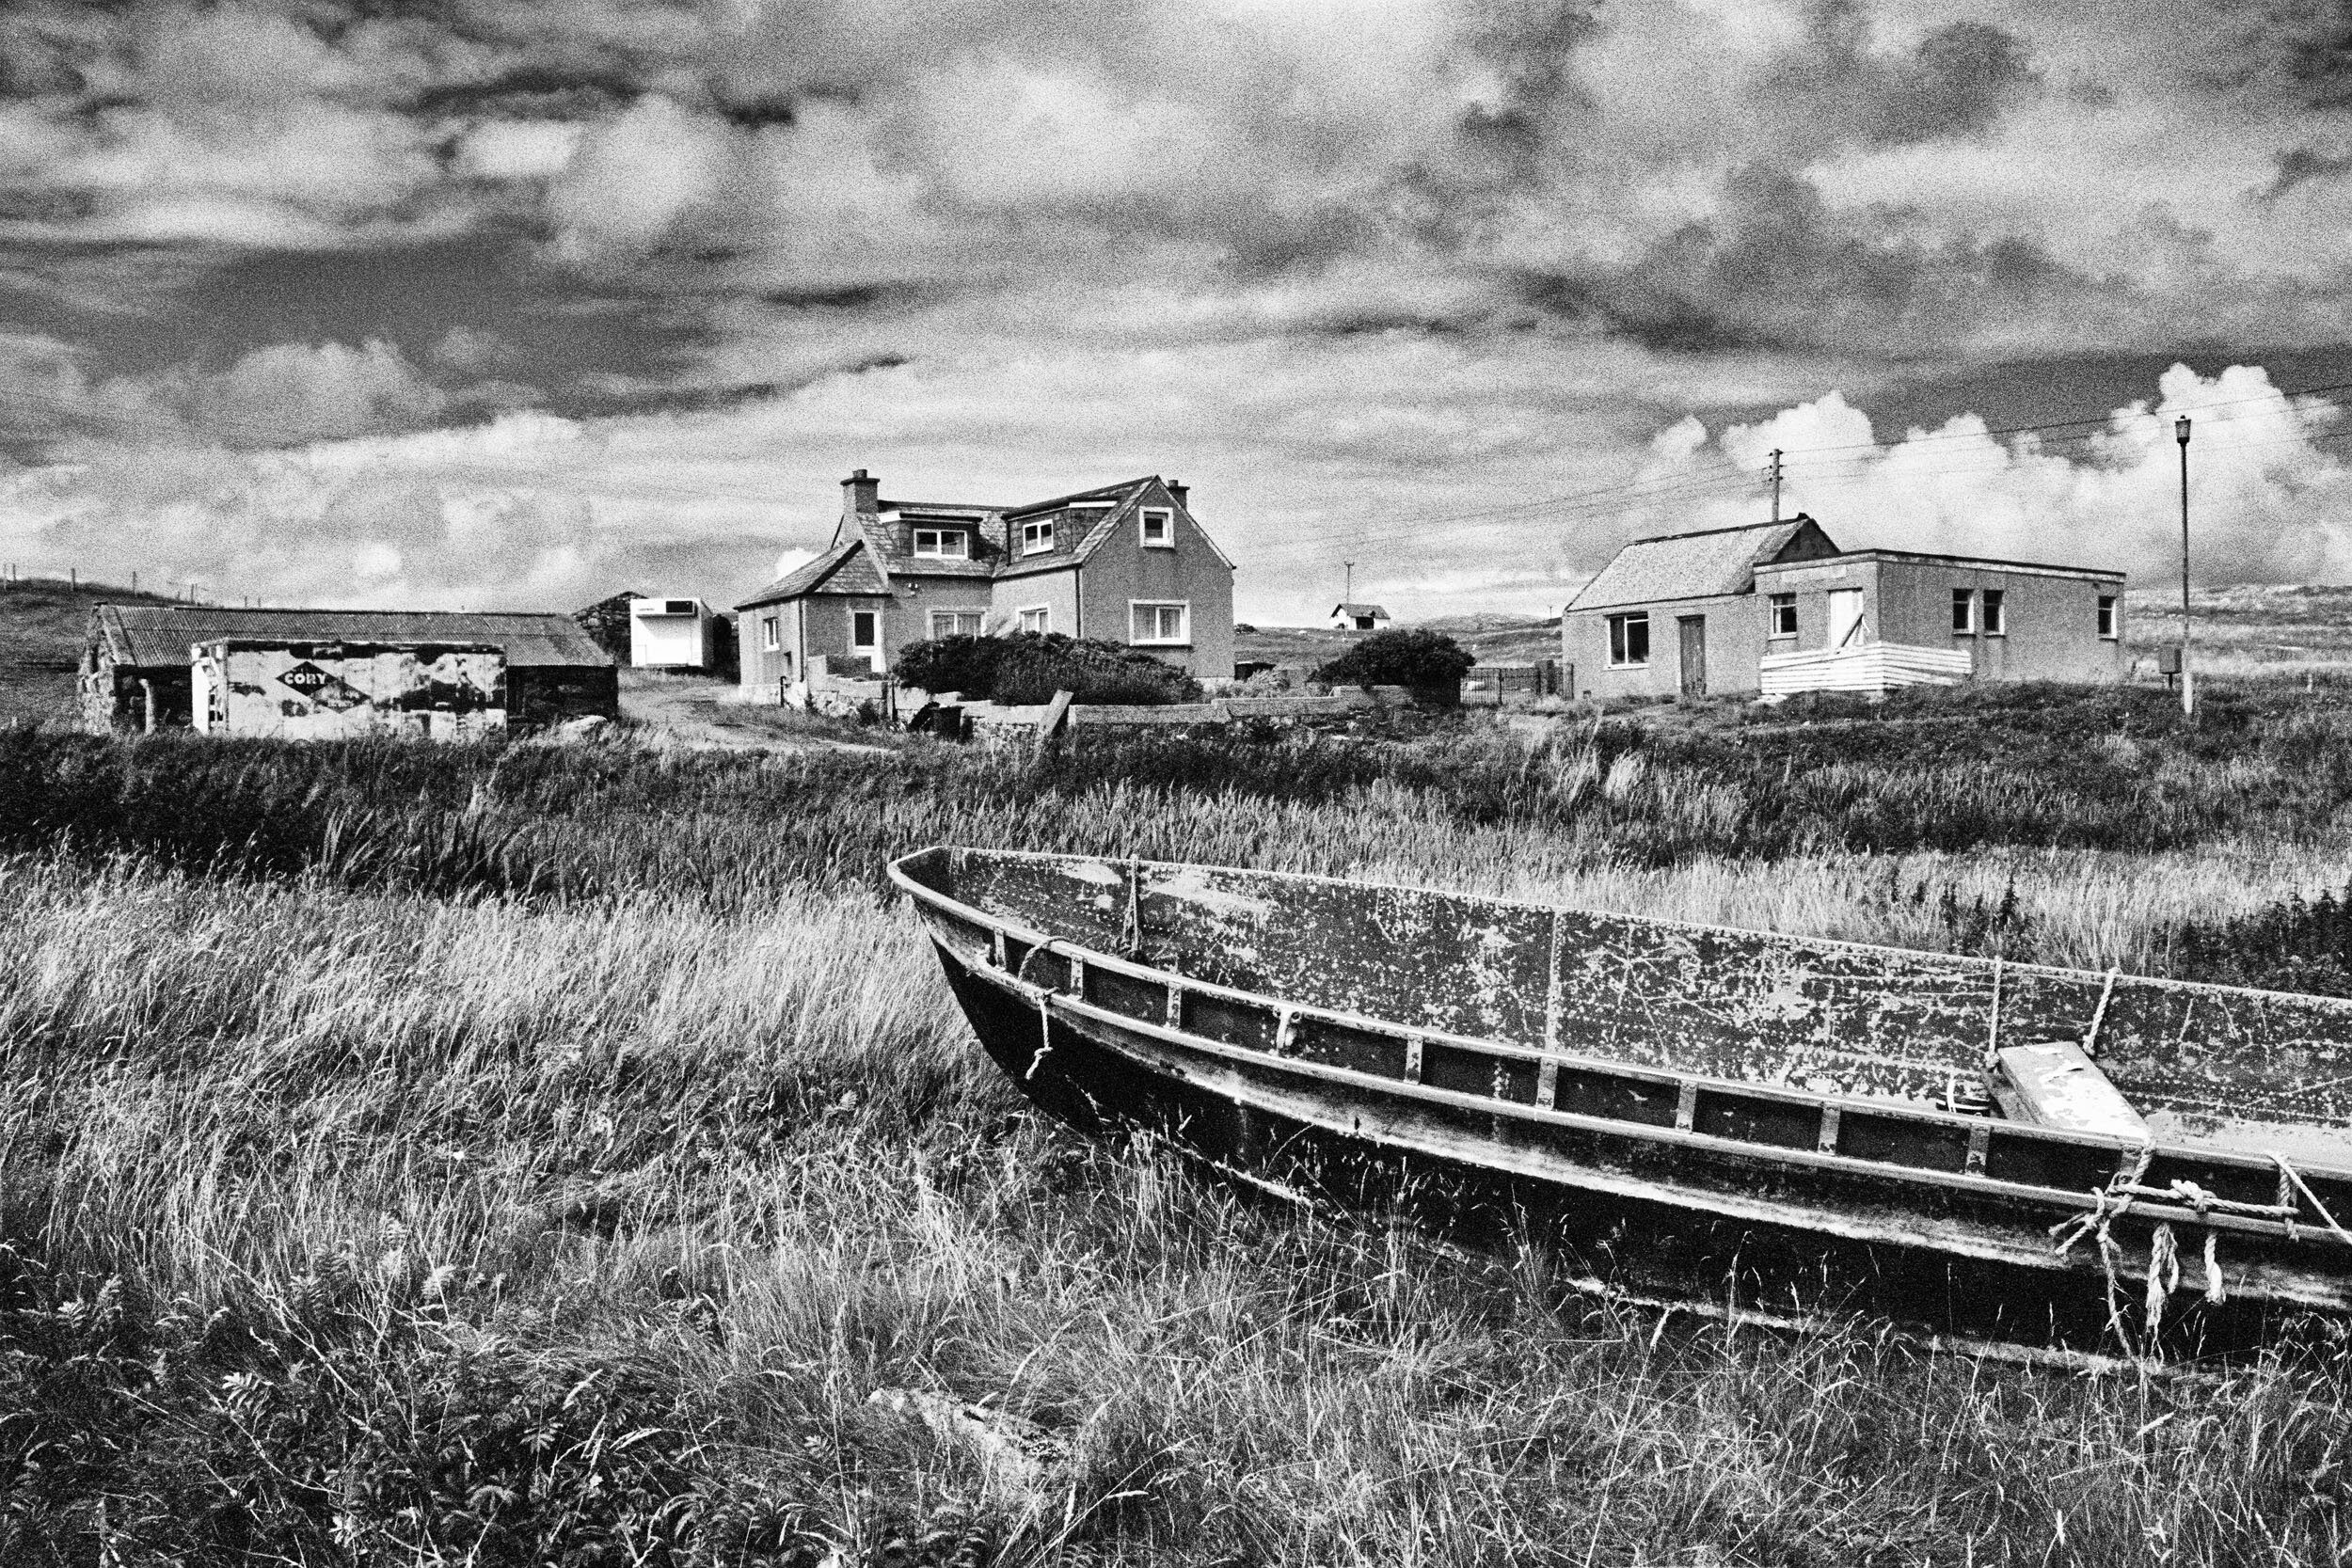  Boat and Houses, Backhill, Isle of Berneray, 2018 